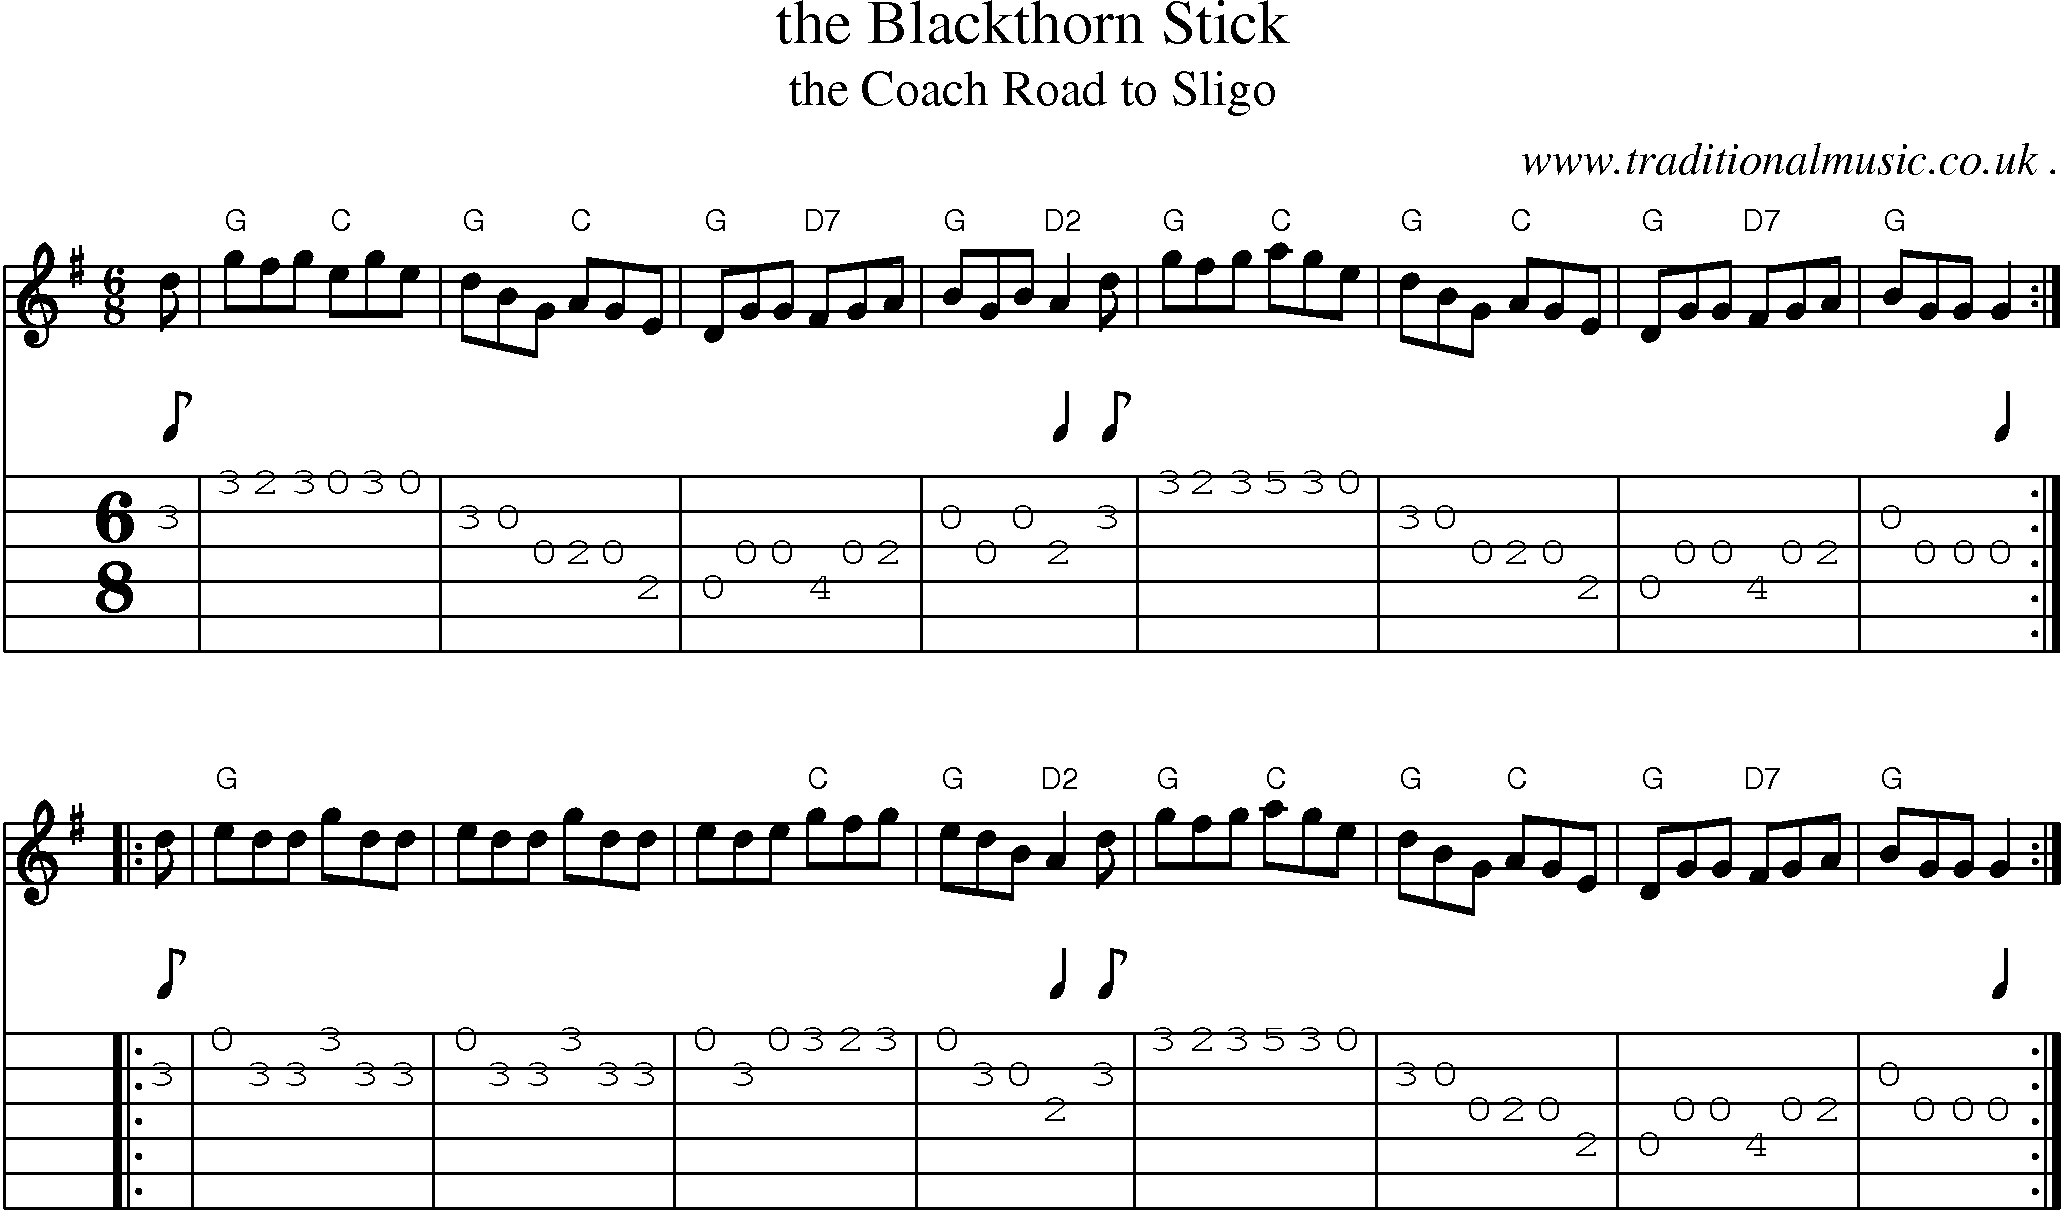 Sheet-music  score, Chords and Guitar Tabs for The Blackthorn Stick